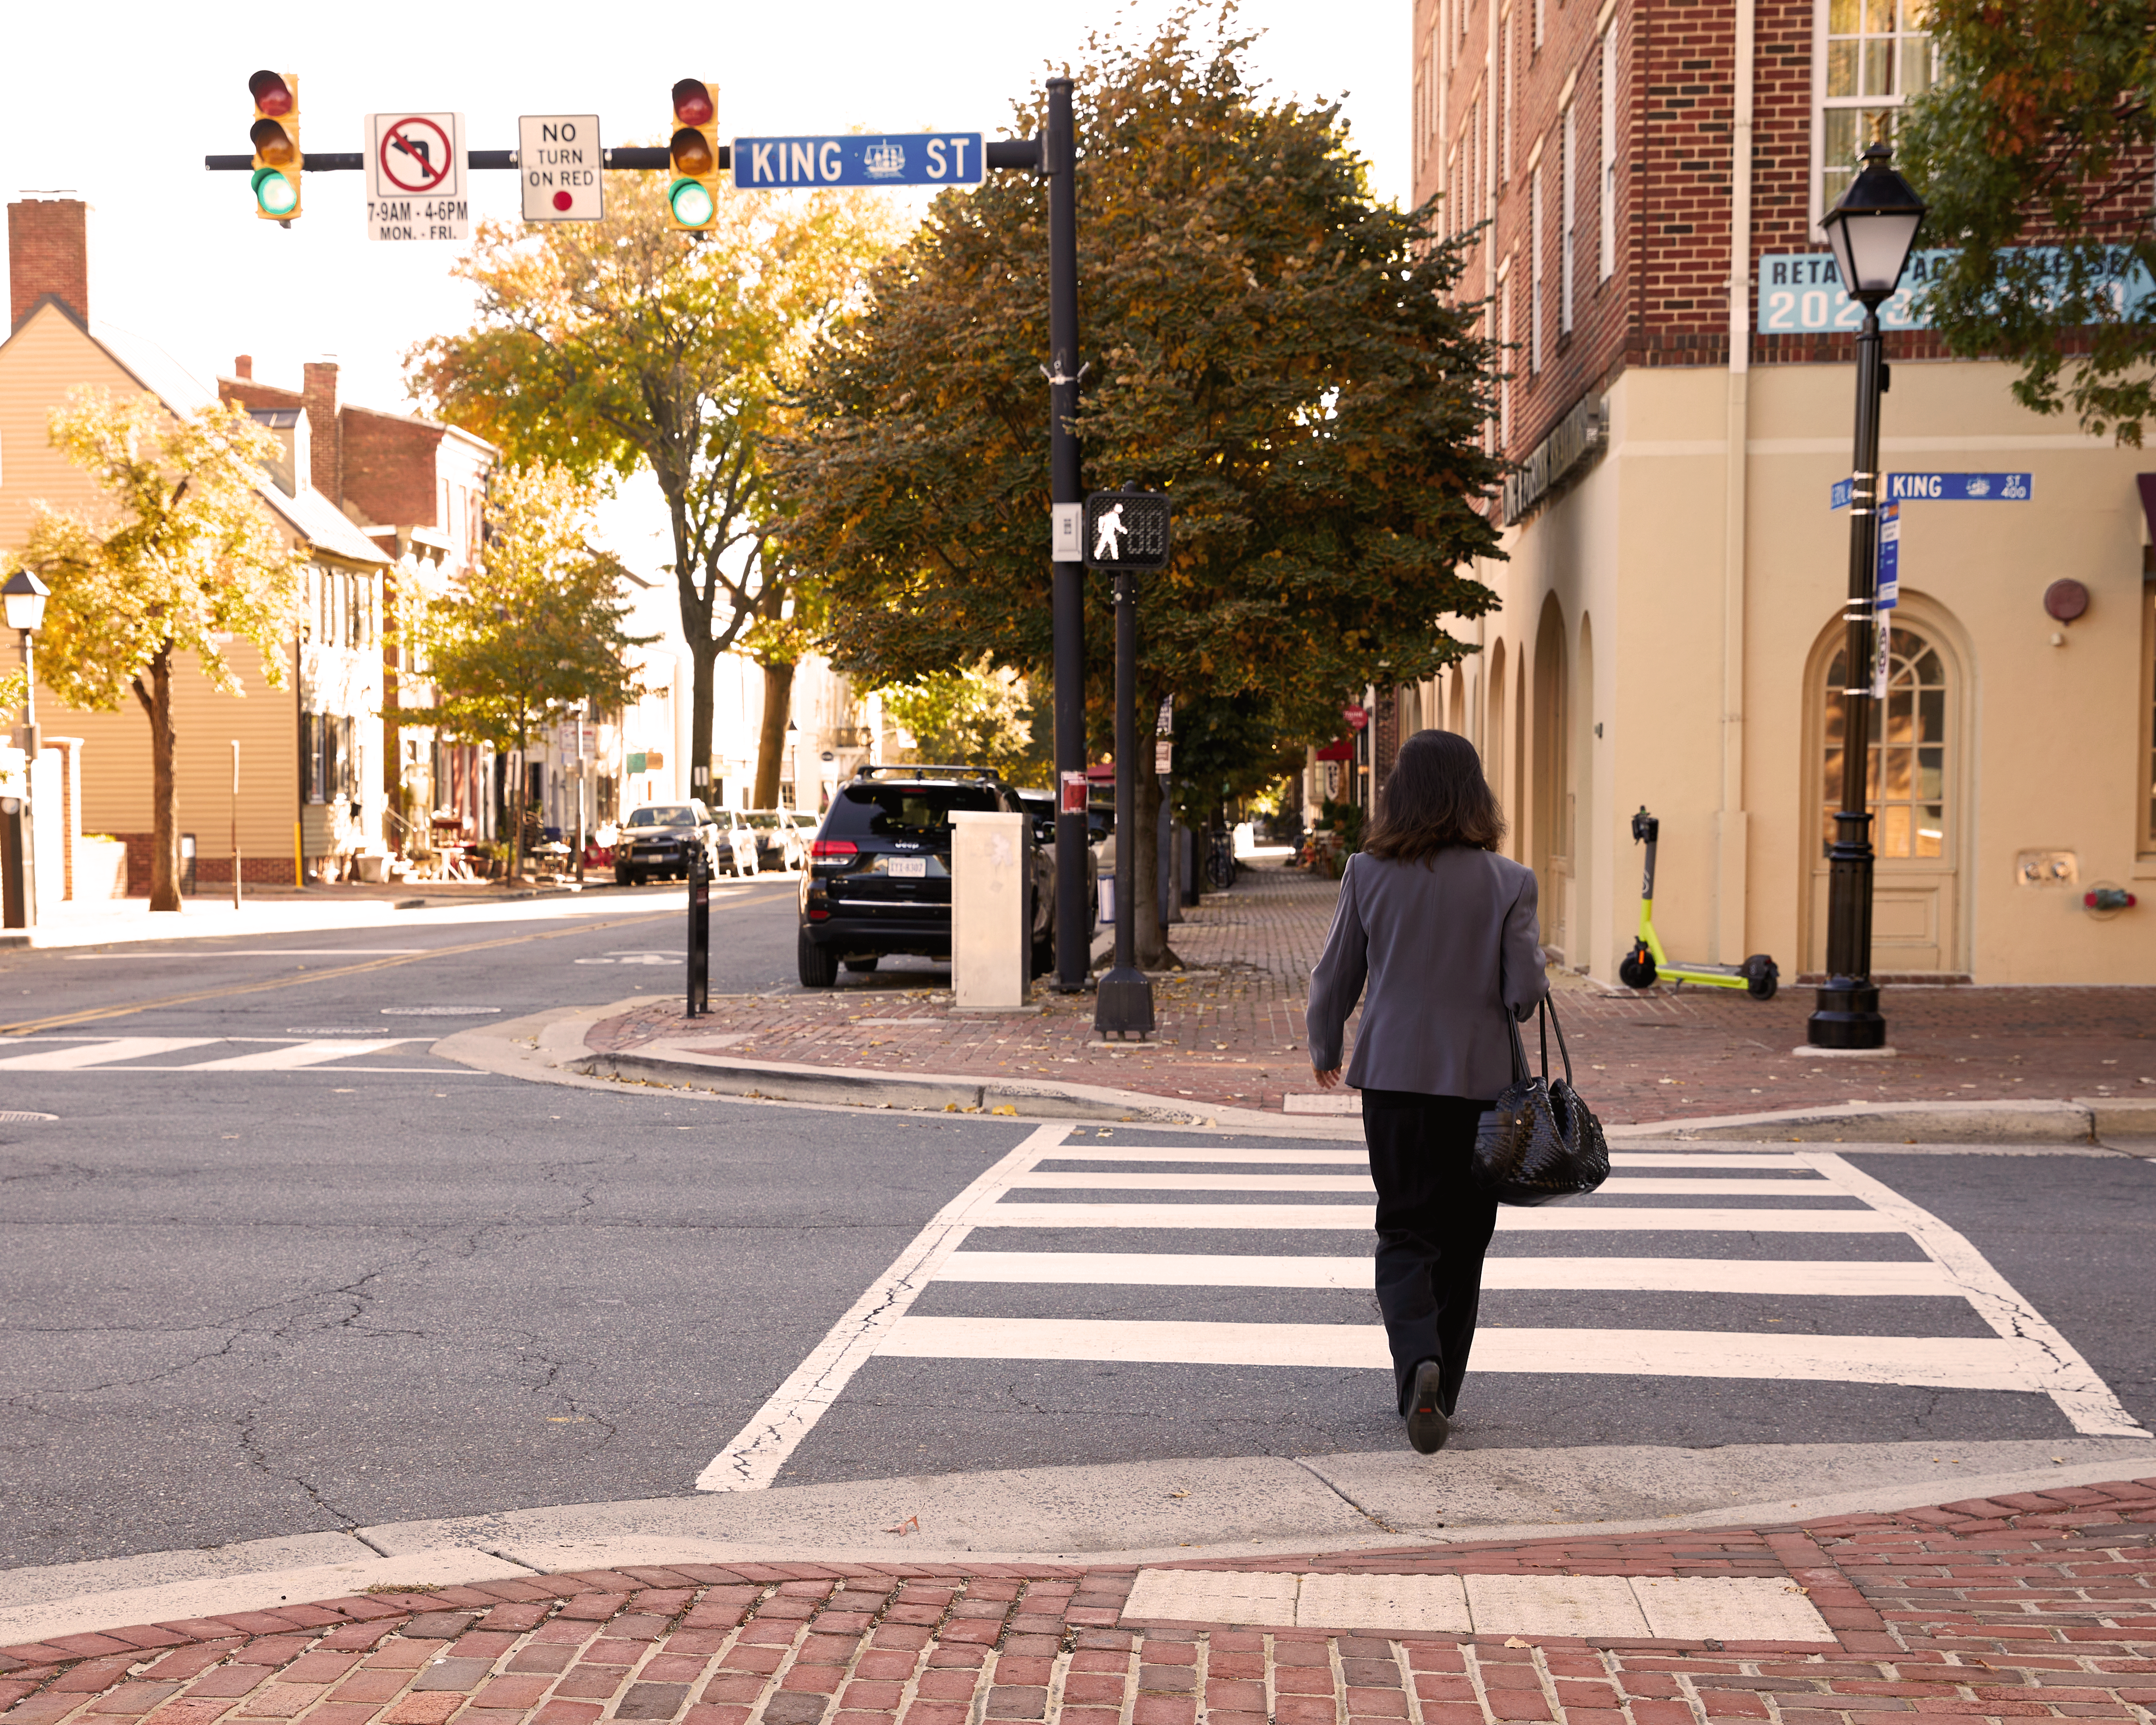 King Street in Old Town Alexandria. A No Turn on Red Sign is posted on traffic signal. Pedestrian in crosswalk